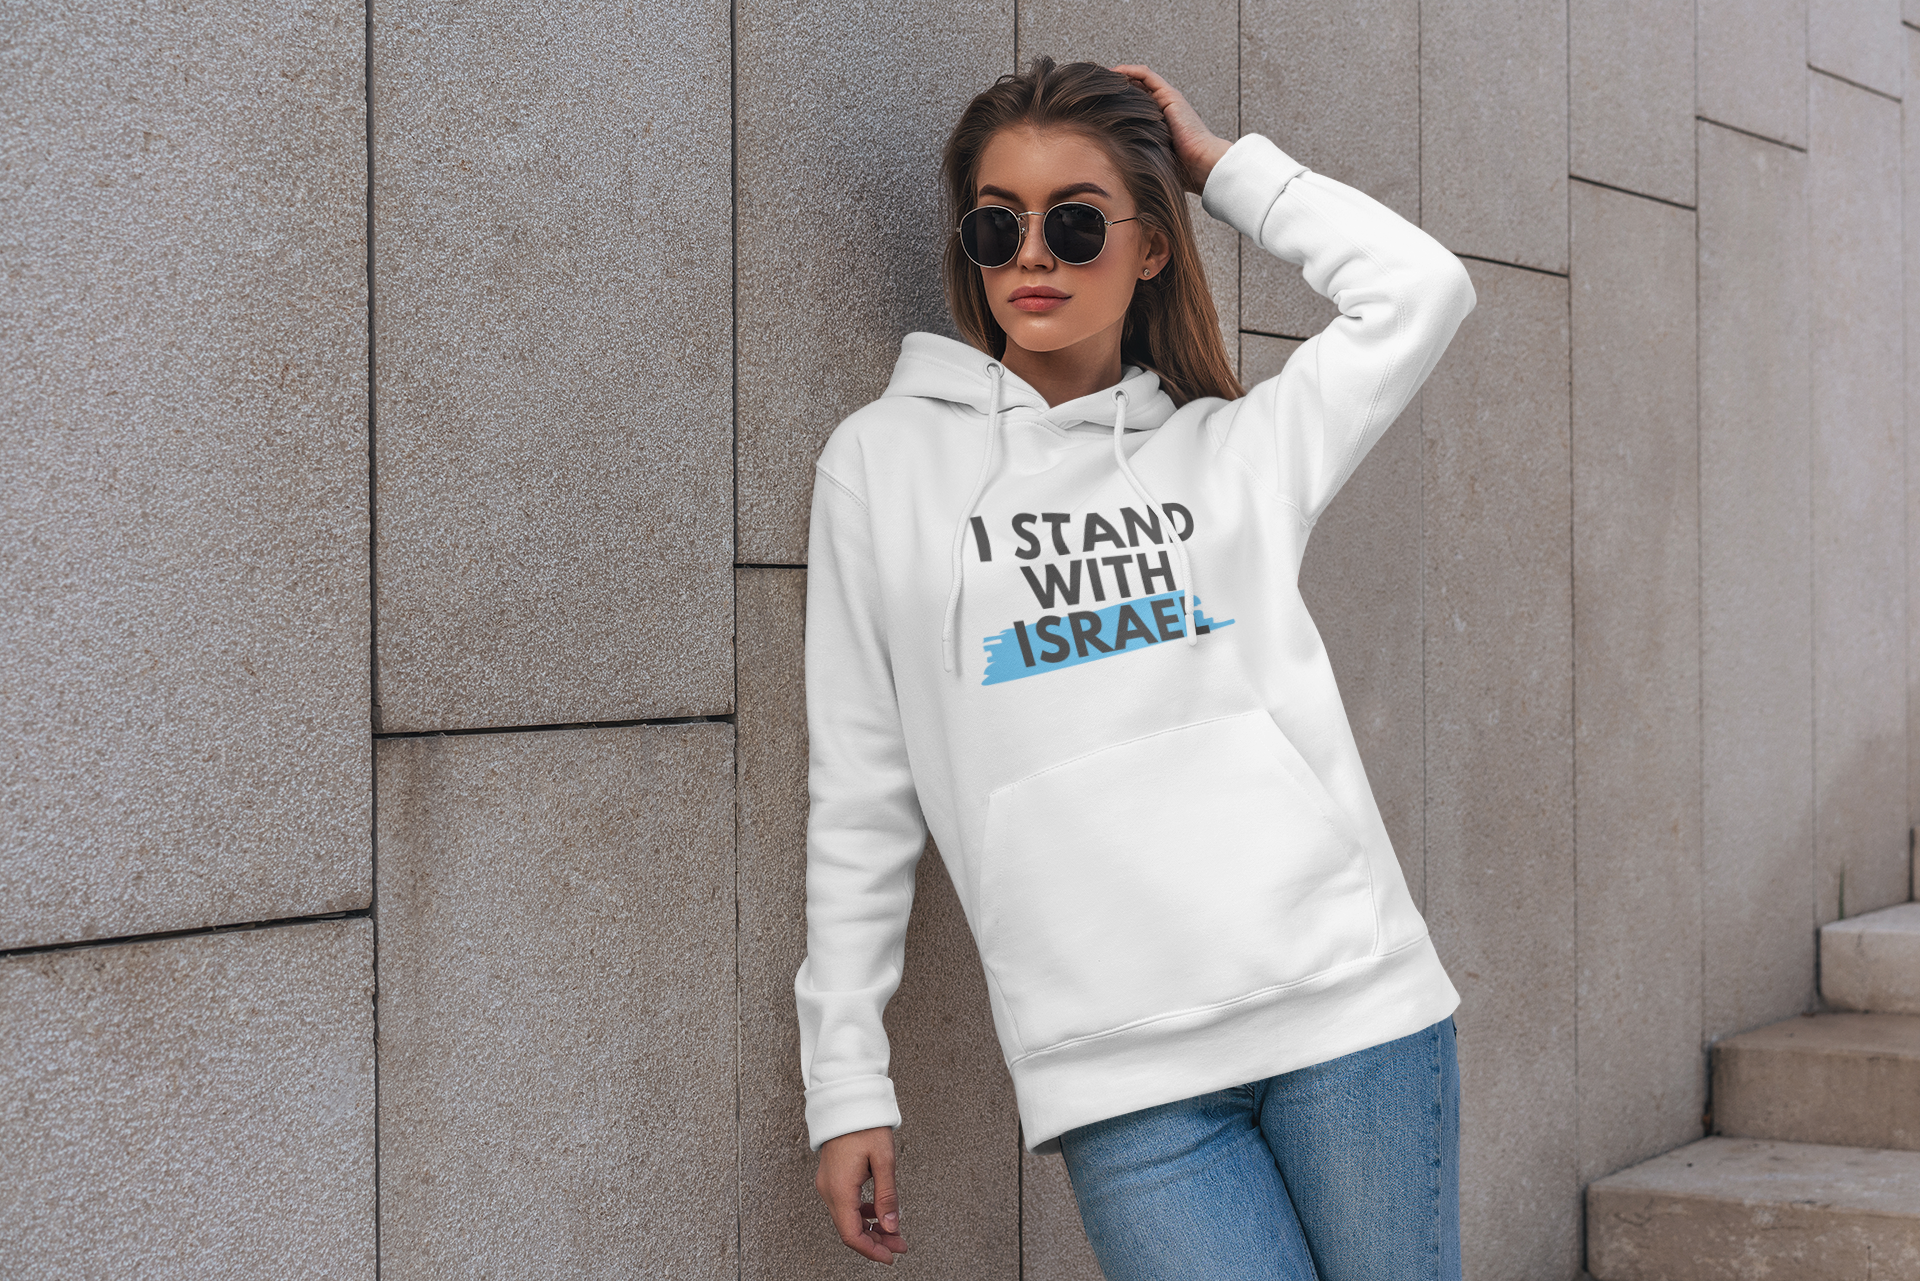 I Stand With Israel Hoodies Women